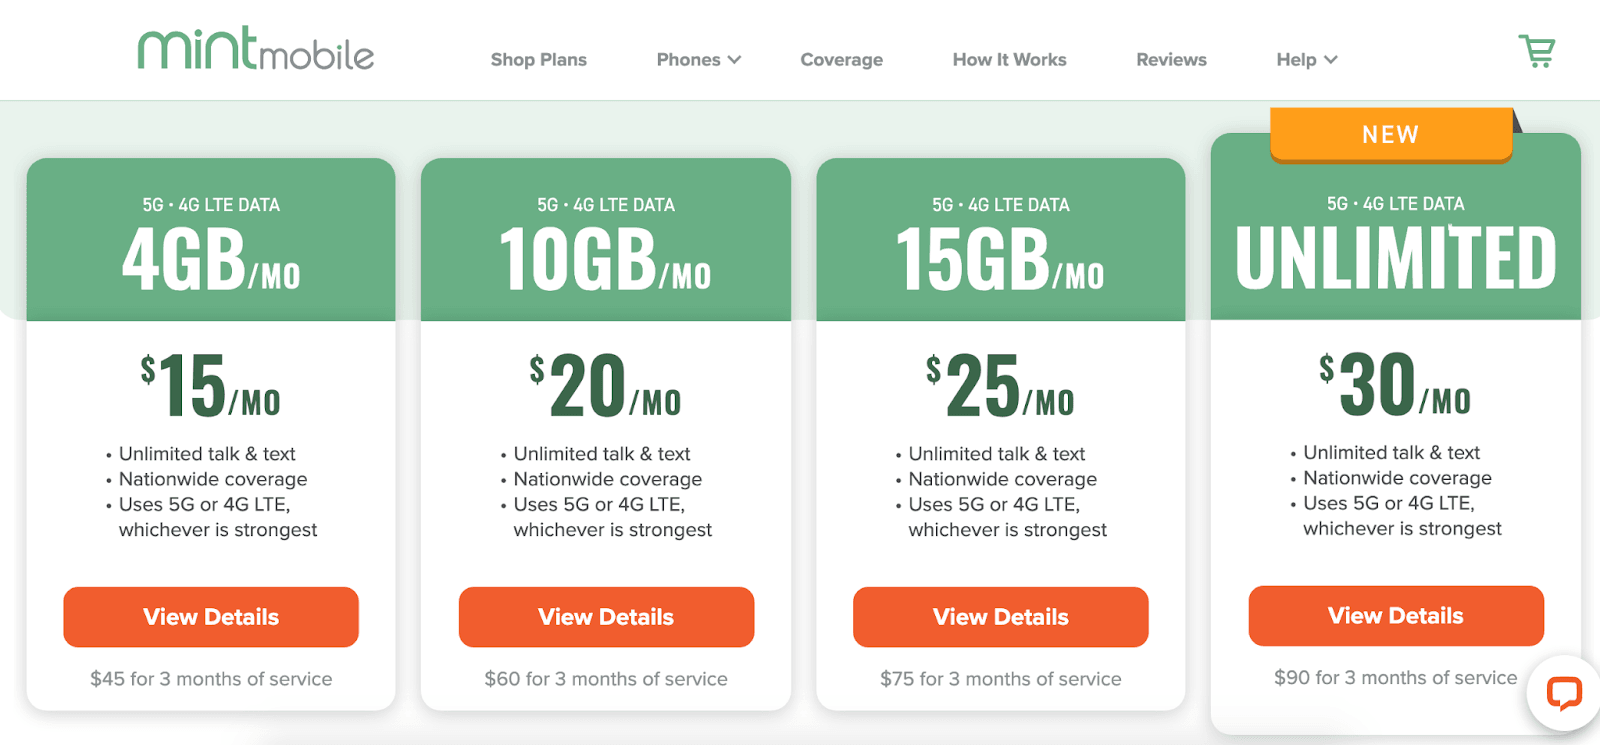 Mint Mobile Review: My Experience Researching Mint Mobile - Plan options